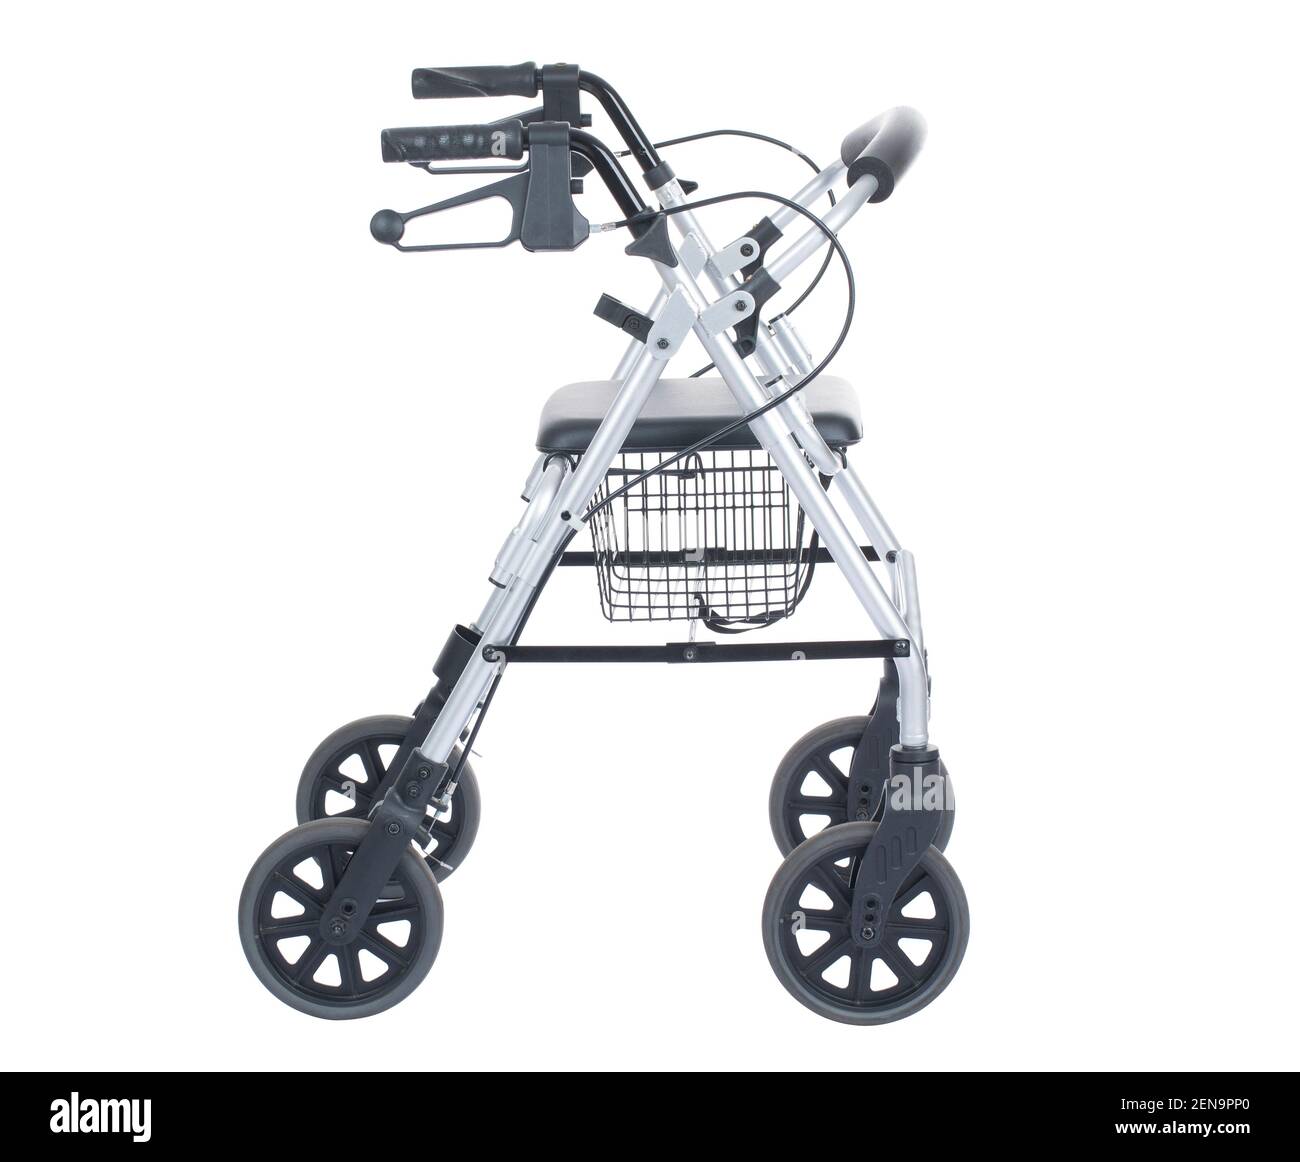 Walking aid for a patient designed to improve their walking pattern, balance or safety while mobilising independently, walking aid concept Stock Photo